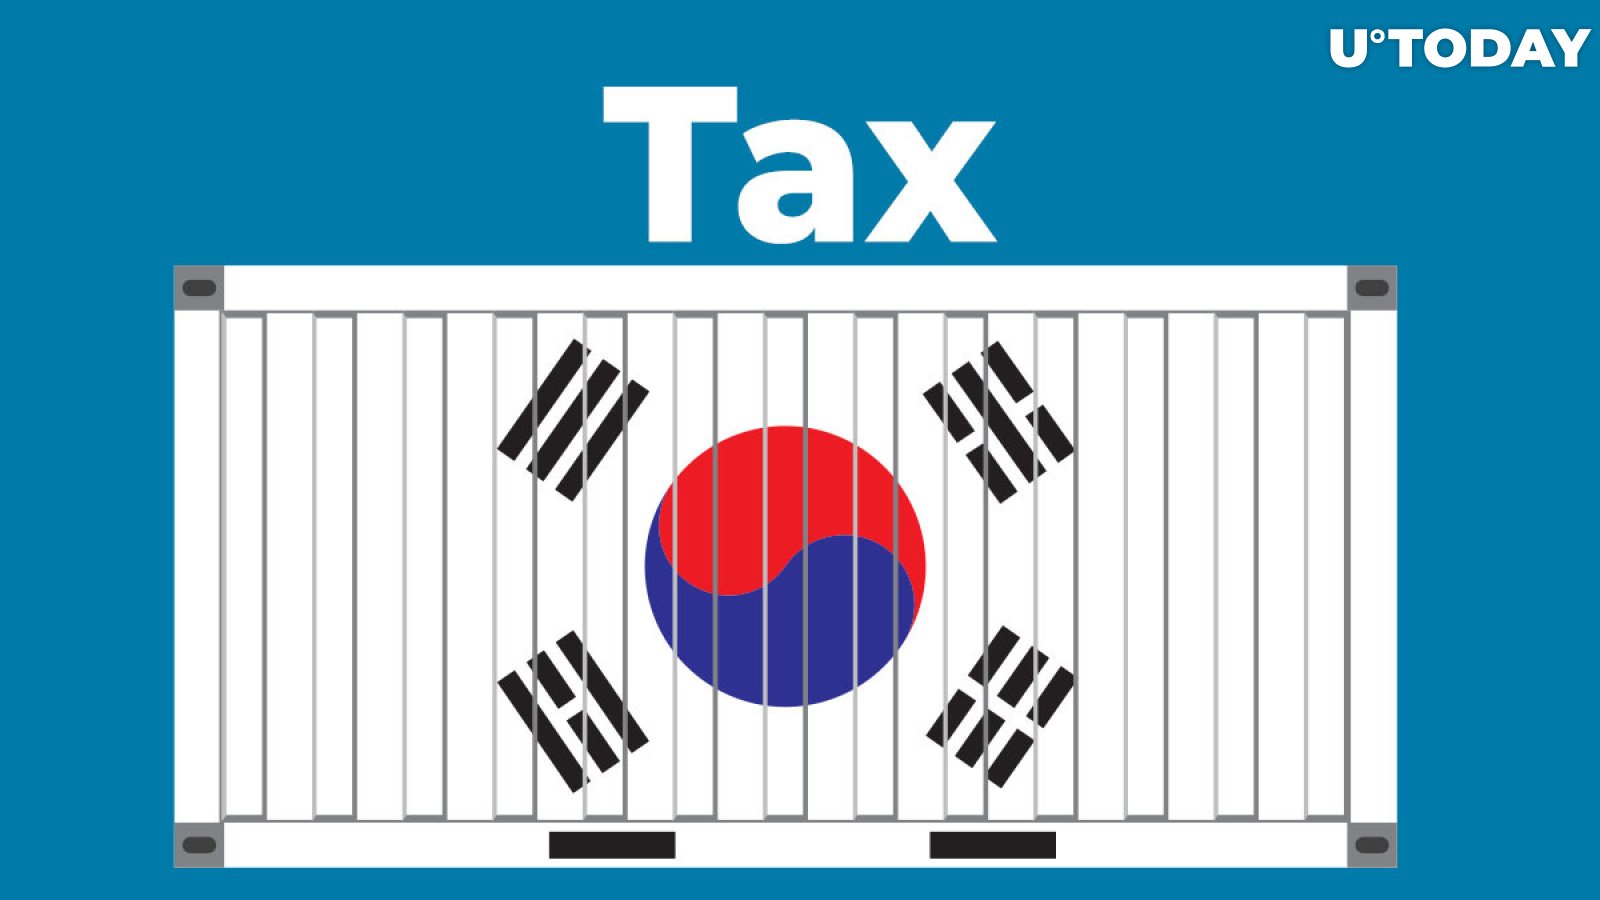 South Korea Plans to Tax Cryptocurrency, According to Its Finance Minister 